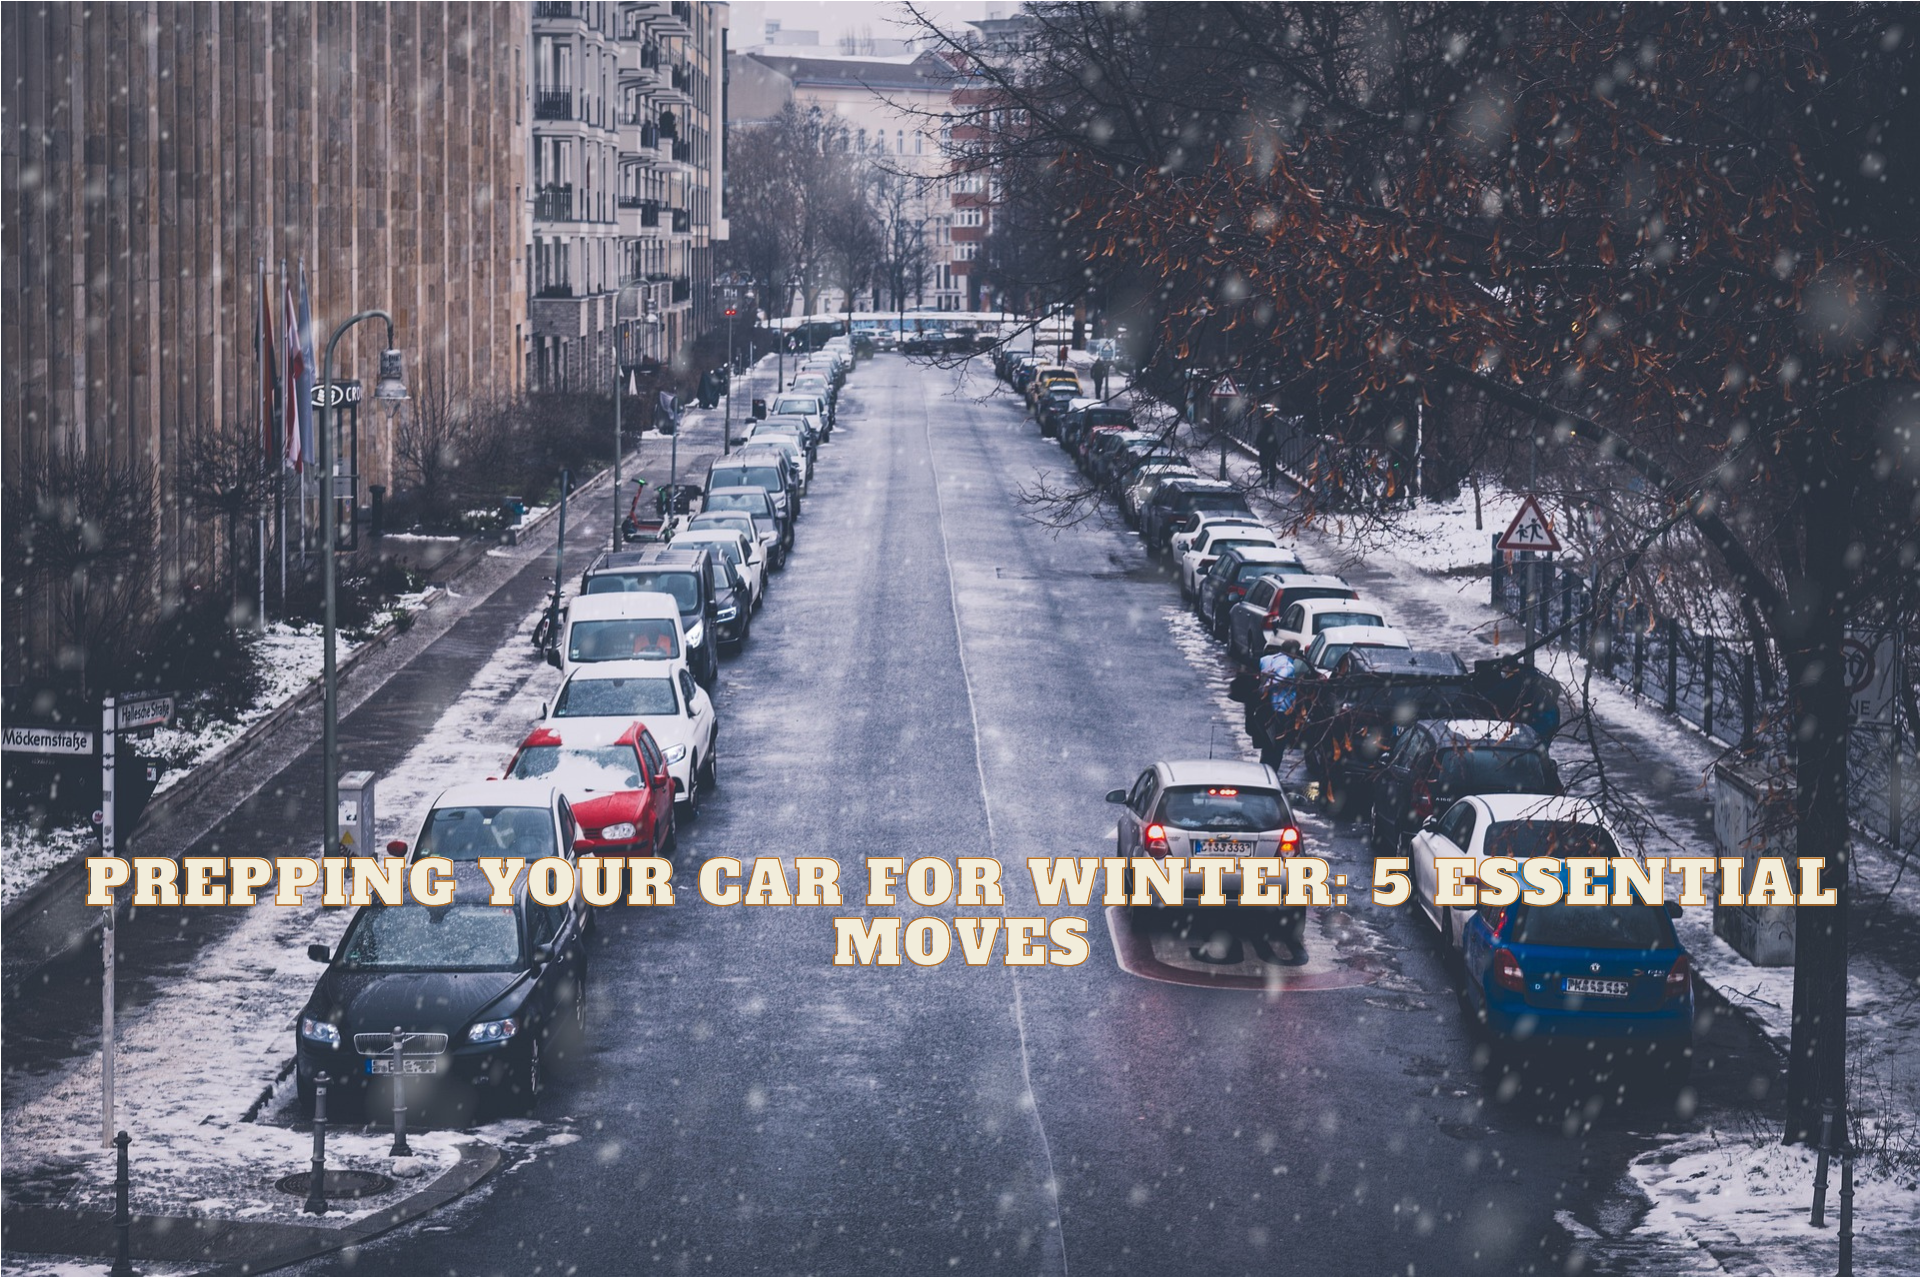 Prepping Your Car for Winter 5 Essential Moves